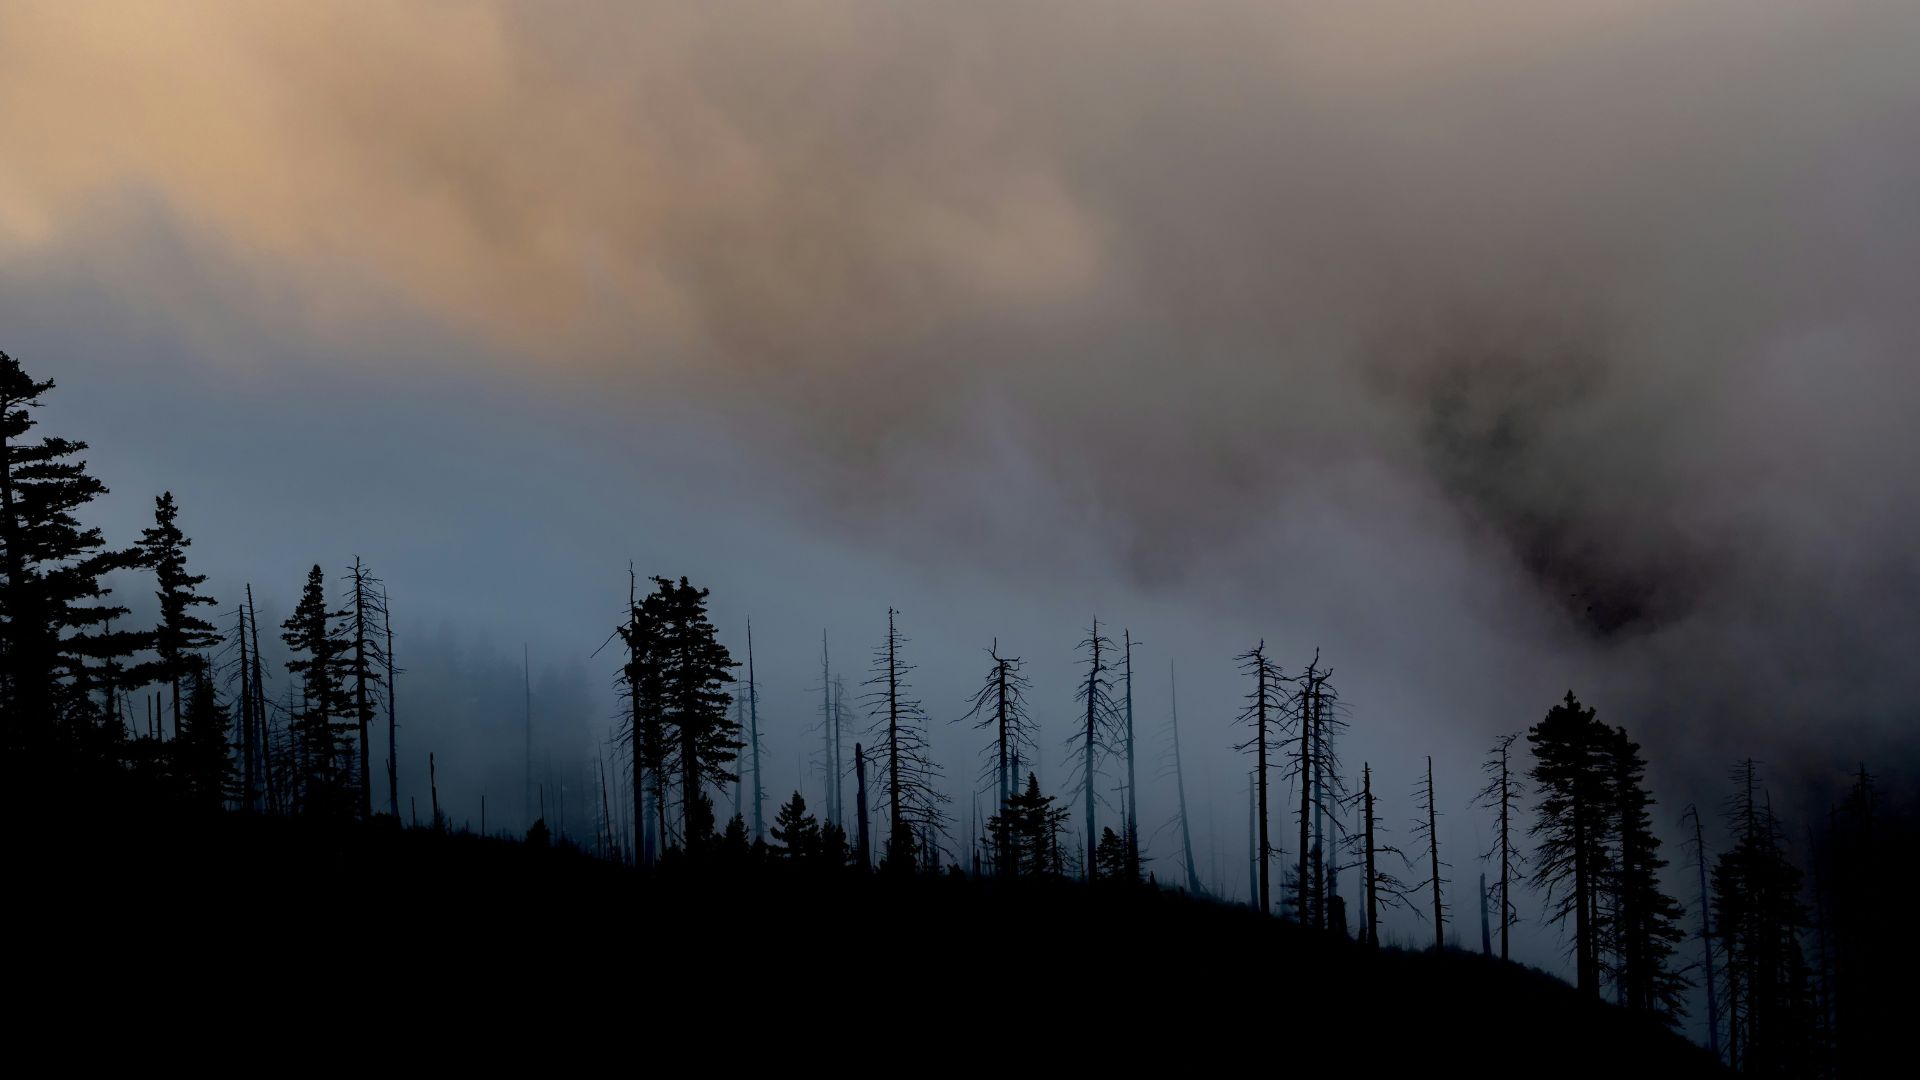 wildfire smoke bellowing off of a hill with burnt trees in front of it